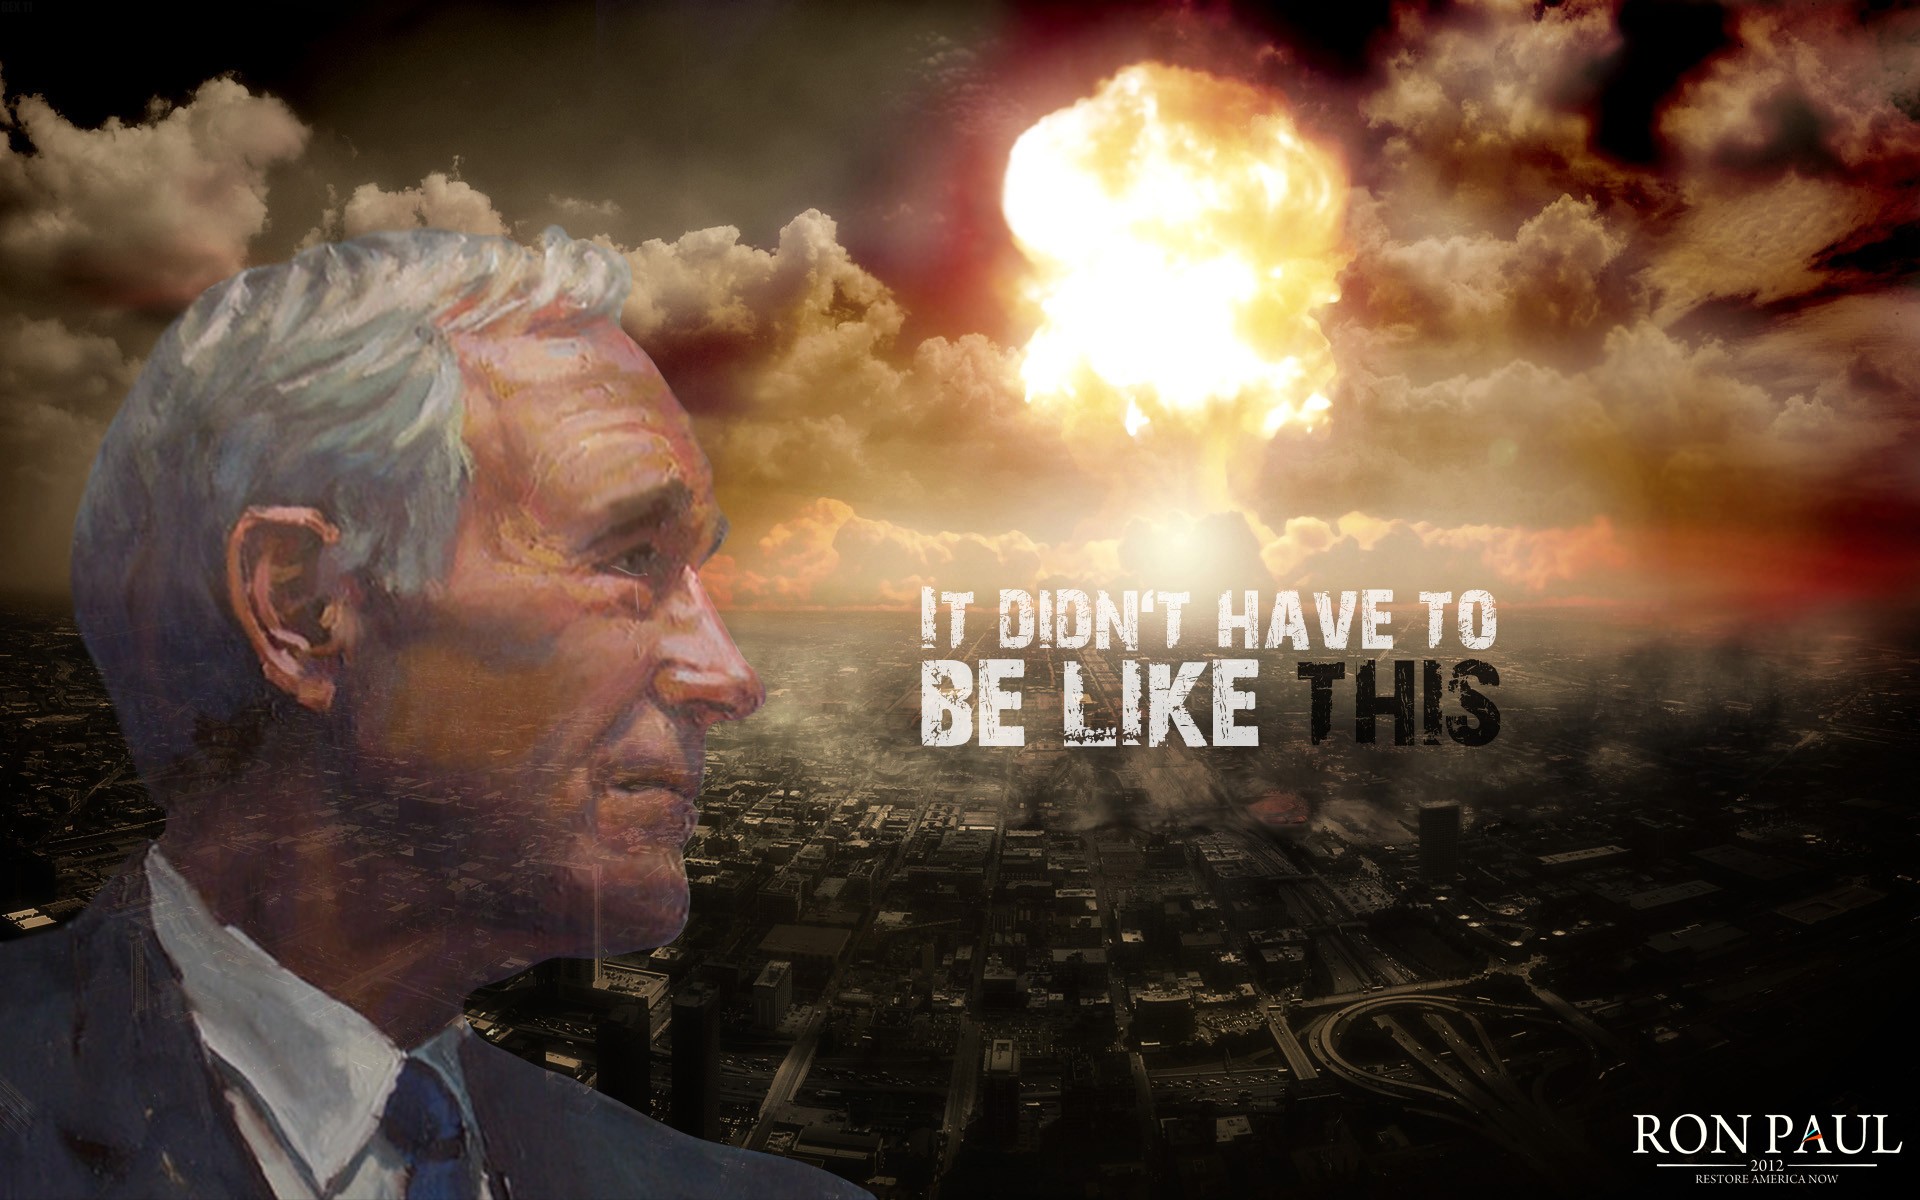 ... Ron Paul - It didn't have to be like this by g3xter